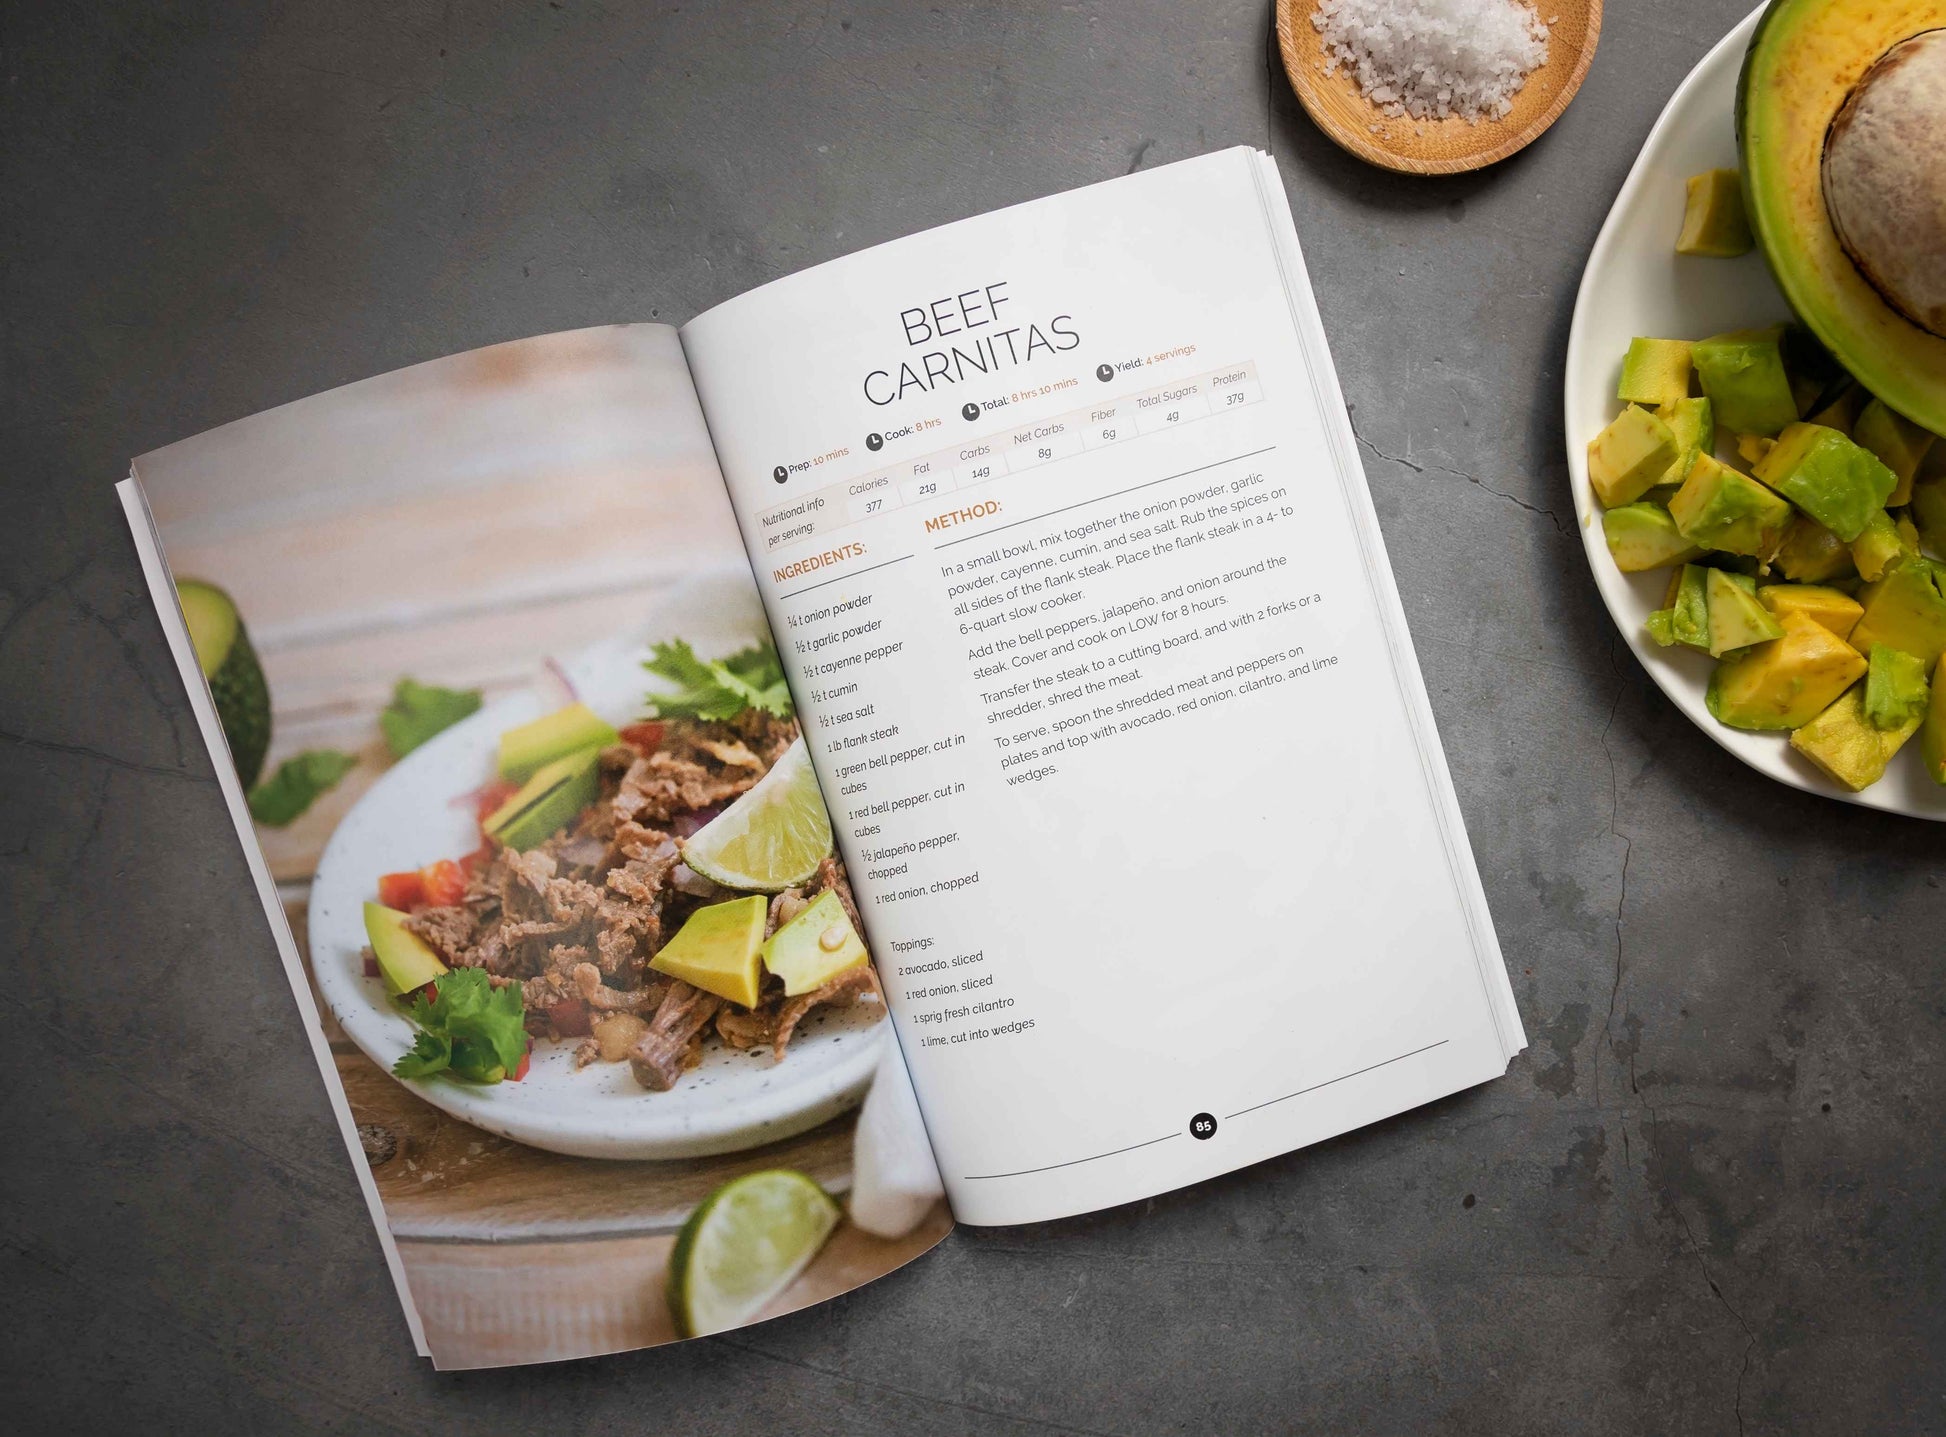 An open Keto Slow Cooker Cookbook volume 2 is placed on a plain grey surface. A plate of avocado and a bowl of salt are seen.